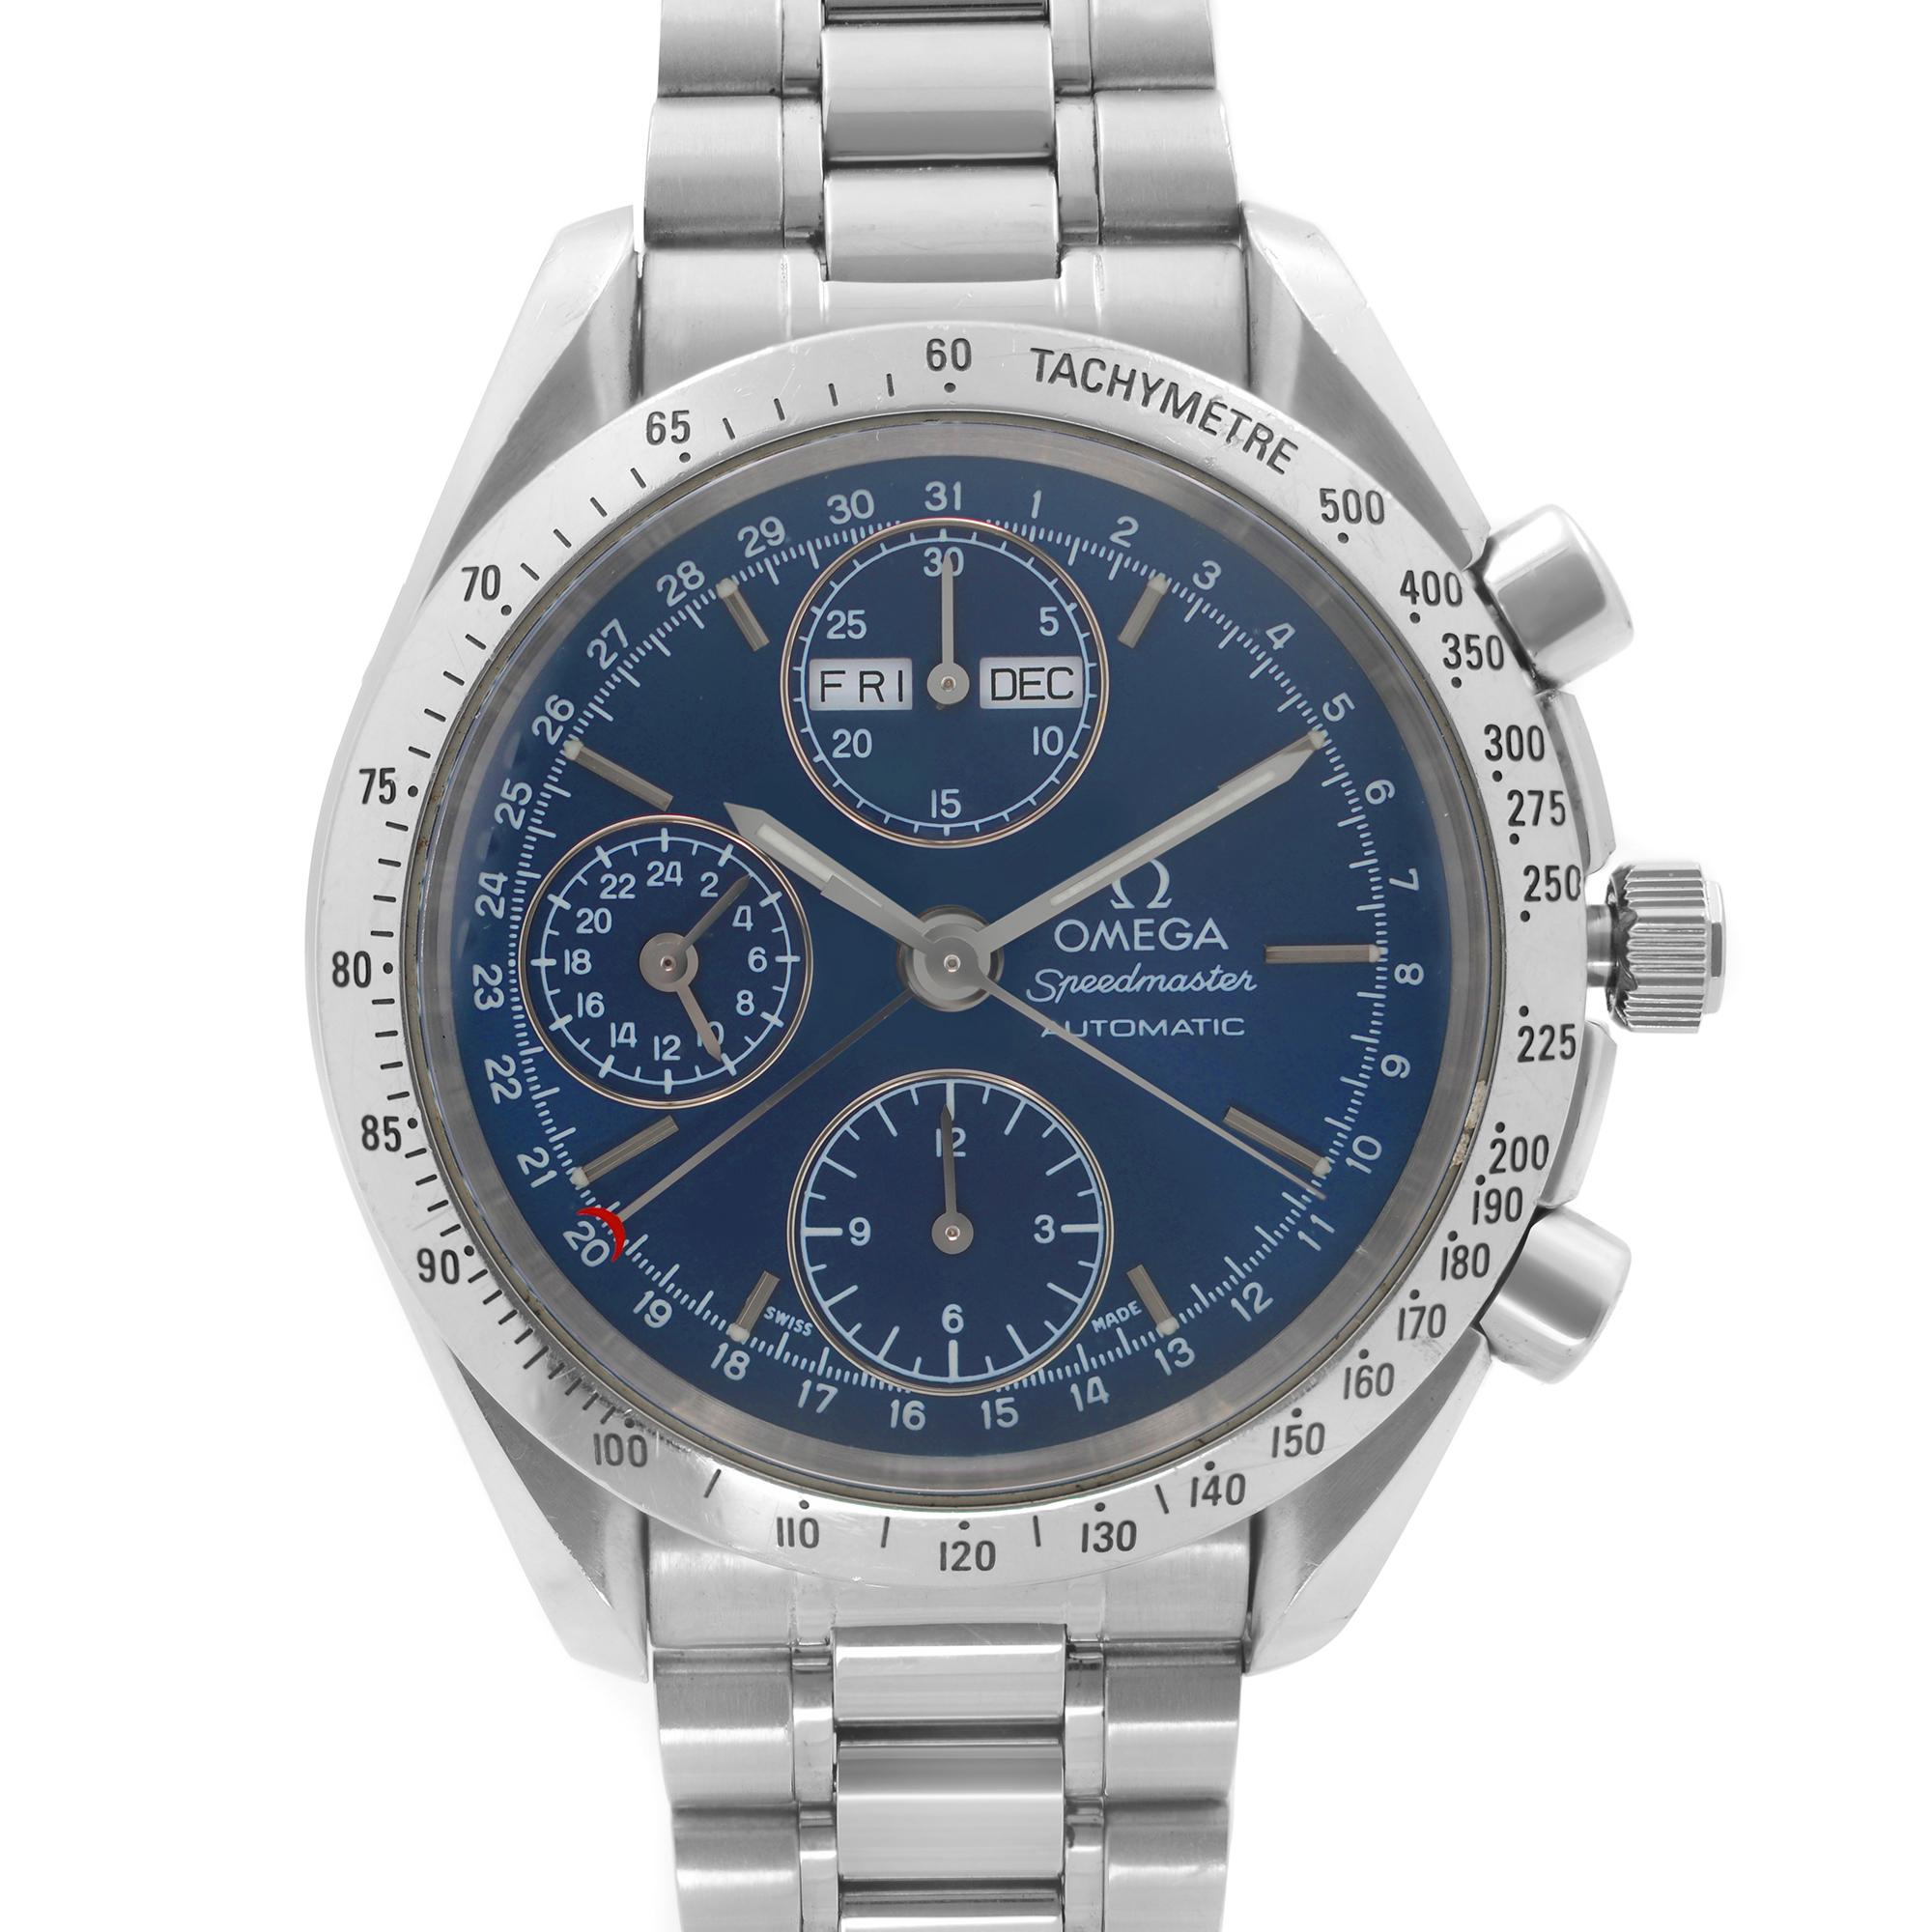 Pre Owned Omega Speedmaster Steel Chronograph Blue Dial Automatic Mens Watch 3521.80. This Timepiece Features: Stainless Steel Case & Bracelet, Fixed Stainless Steel Bezel with Tachymeter, Blue Dial with Luminous Silver-Tone Hands and Index Hour